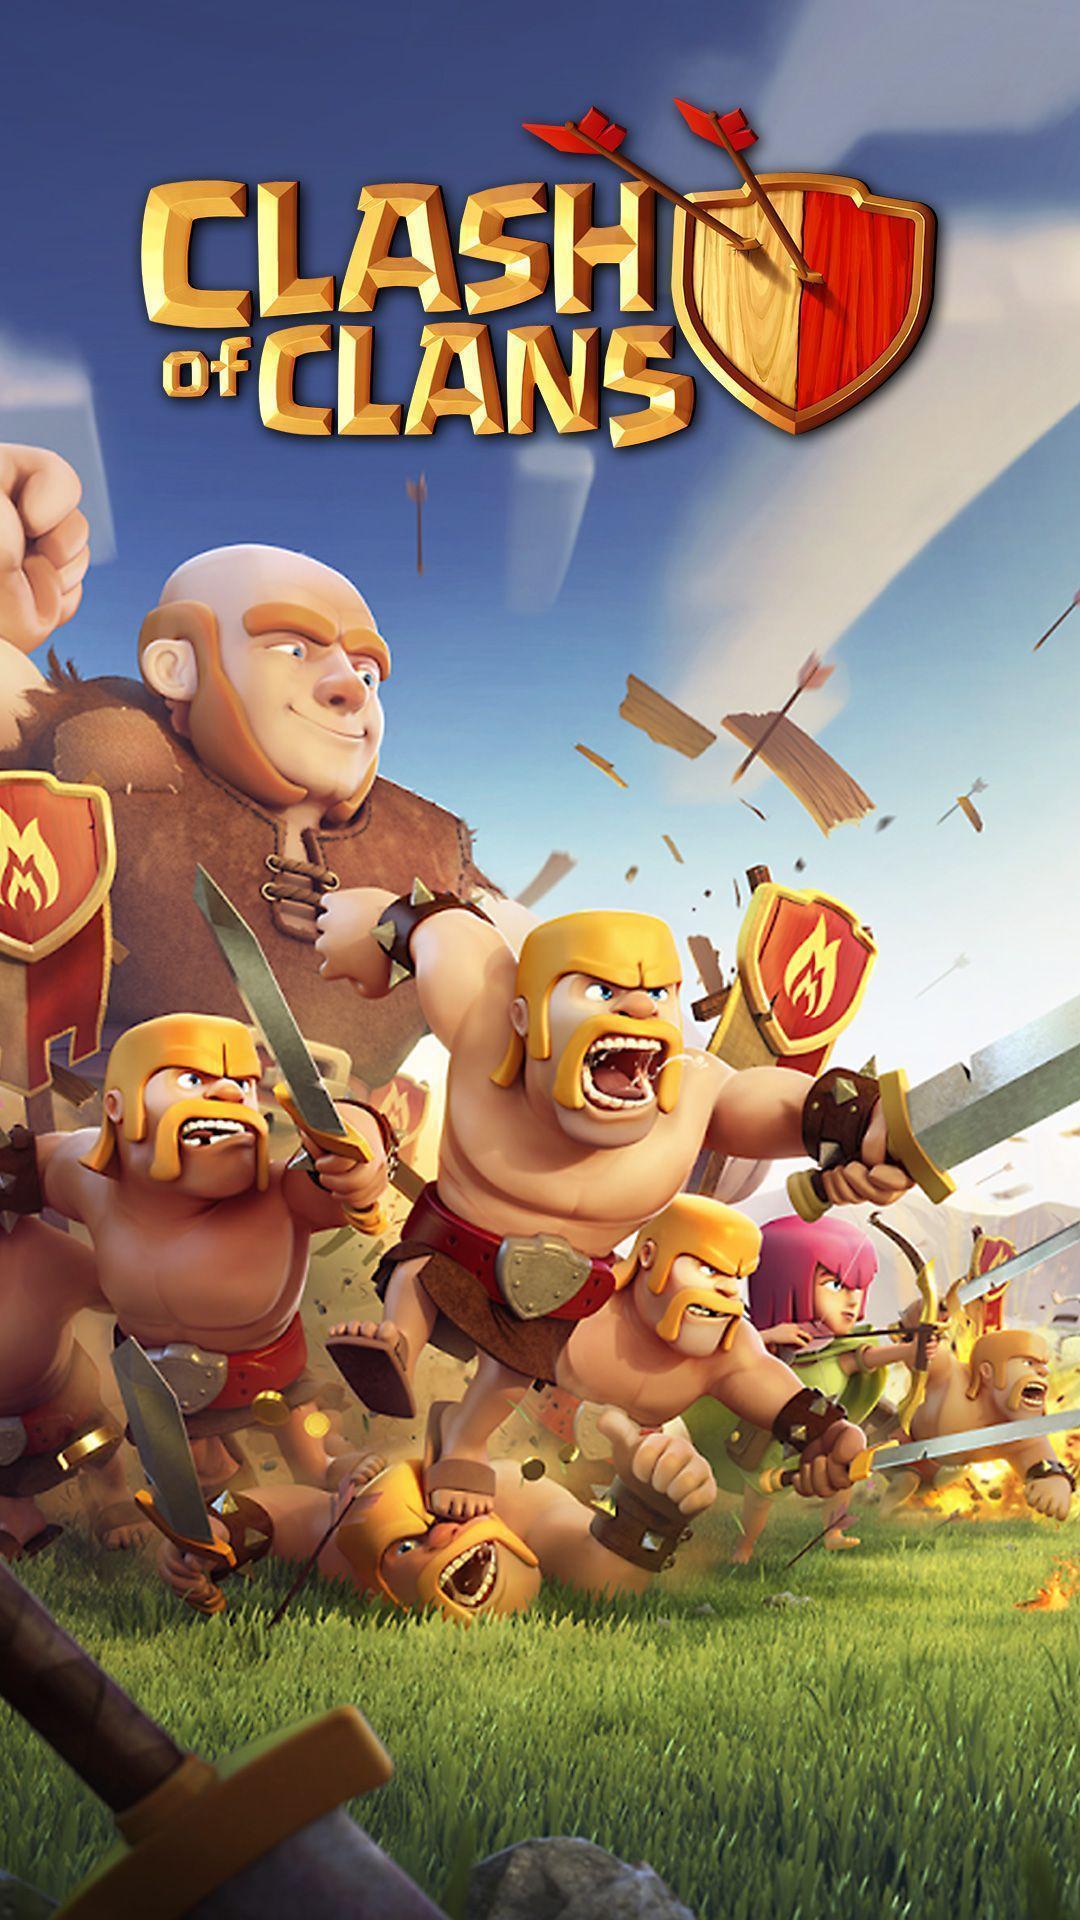 Clash of clans год. Клэш оф кланс. Игра игра Clash of Clans. 2 Игра Clash of Clans. Clan Clan.